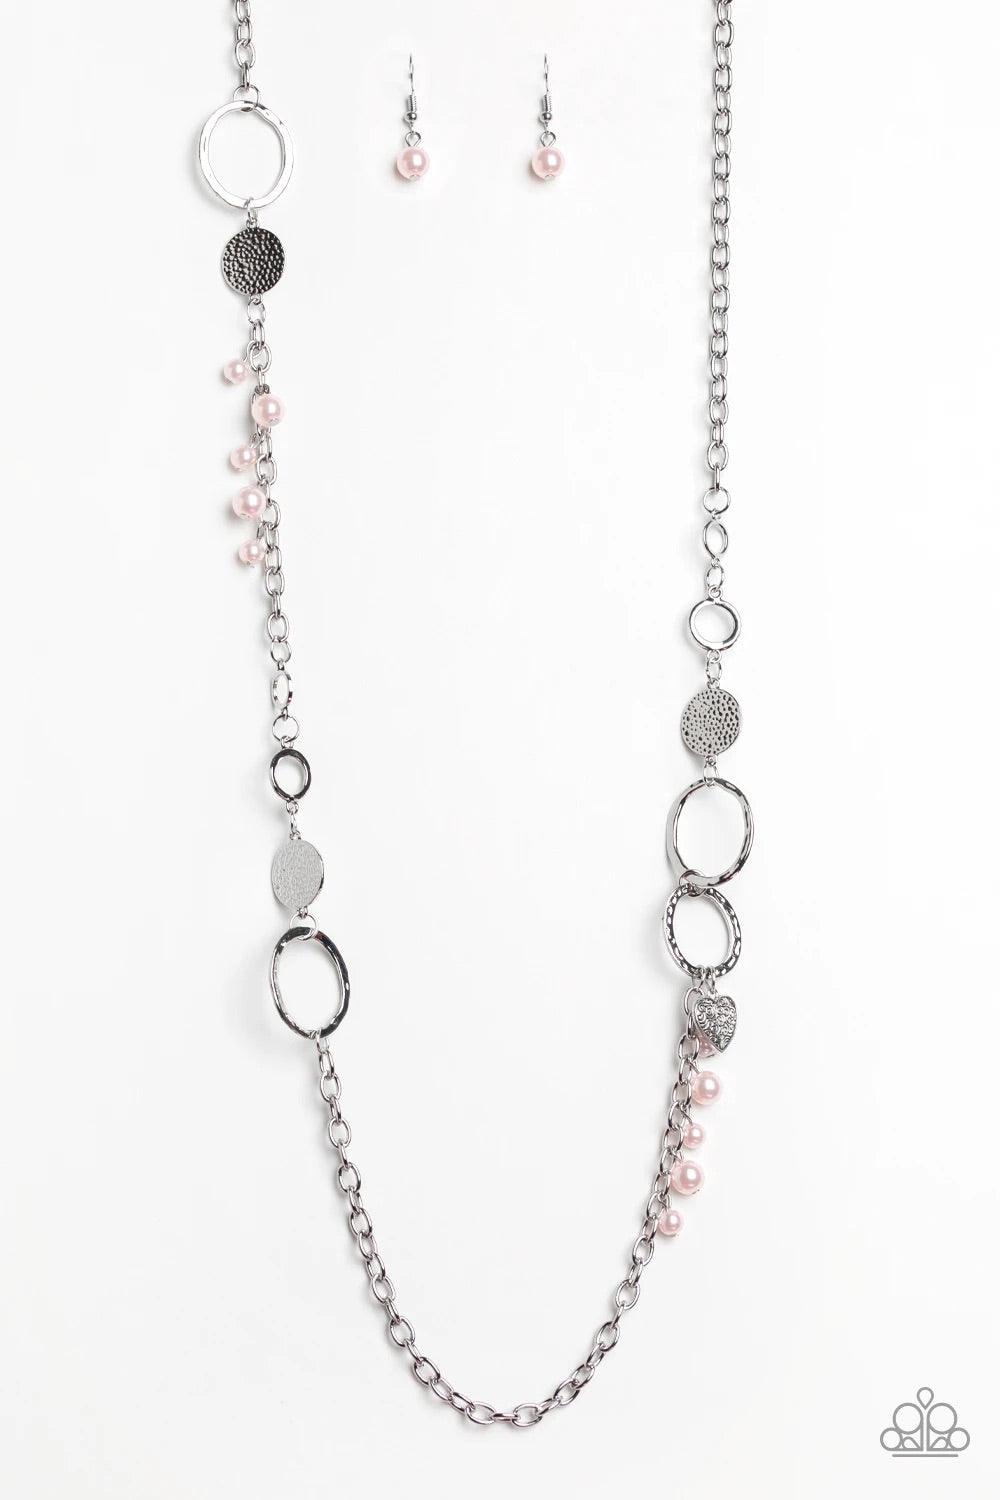 Paparazzi Accessories Unapologetic Flirt - Pink Infused with sections of shimmery silver chains, an assortment of hammered silver discs and silver rings link across the chest. A collection of pearly pink beads and dainty silver heart charms asymmetrically